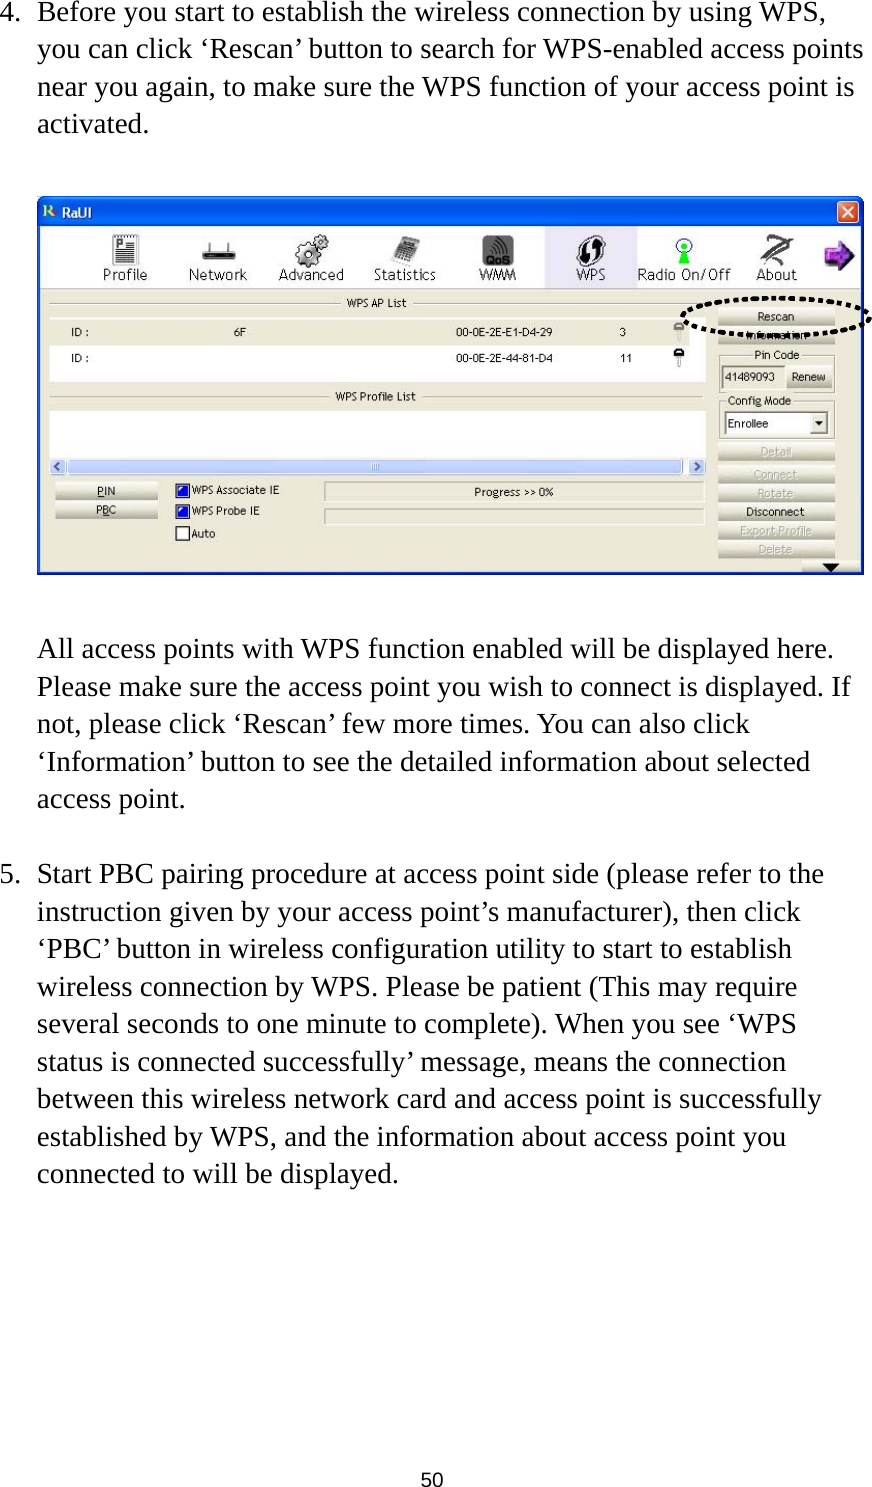  50 4. Before you start to establish the wireless connection by using WPS, you can click ‘Rescan’ button to search for WPS-enabled access points near you again, to make sure the WPS function of your access point is activated.    All access points with WPS function enabled will be displayed here. Please make sure the access point you wish to connect is displayed. If not, please click ‘Rescan’ few more times. You can also click ‘Information’ button to see the detailed information about selected access point.  5. Start PBC pairing procedure at access point side (please refer to the instruction given by your access point’s manufacturer), then click ‘PBC’ button in wireless configuration utility to start to establish wireless connection by WPS. Please be patient (This may require several seconds to one minute to complete). When you see ‘WPS status is connected successfully’ message, means the connection between this wireless network card and access point is successfully established by WPS, and the information about access point you connected to will be displayed.       